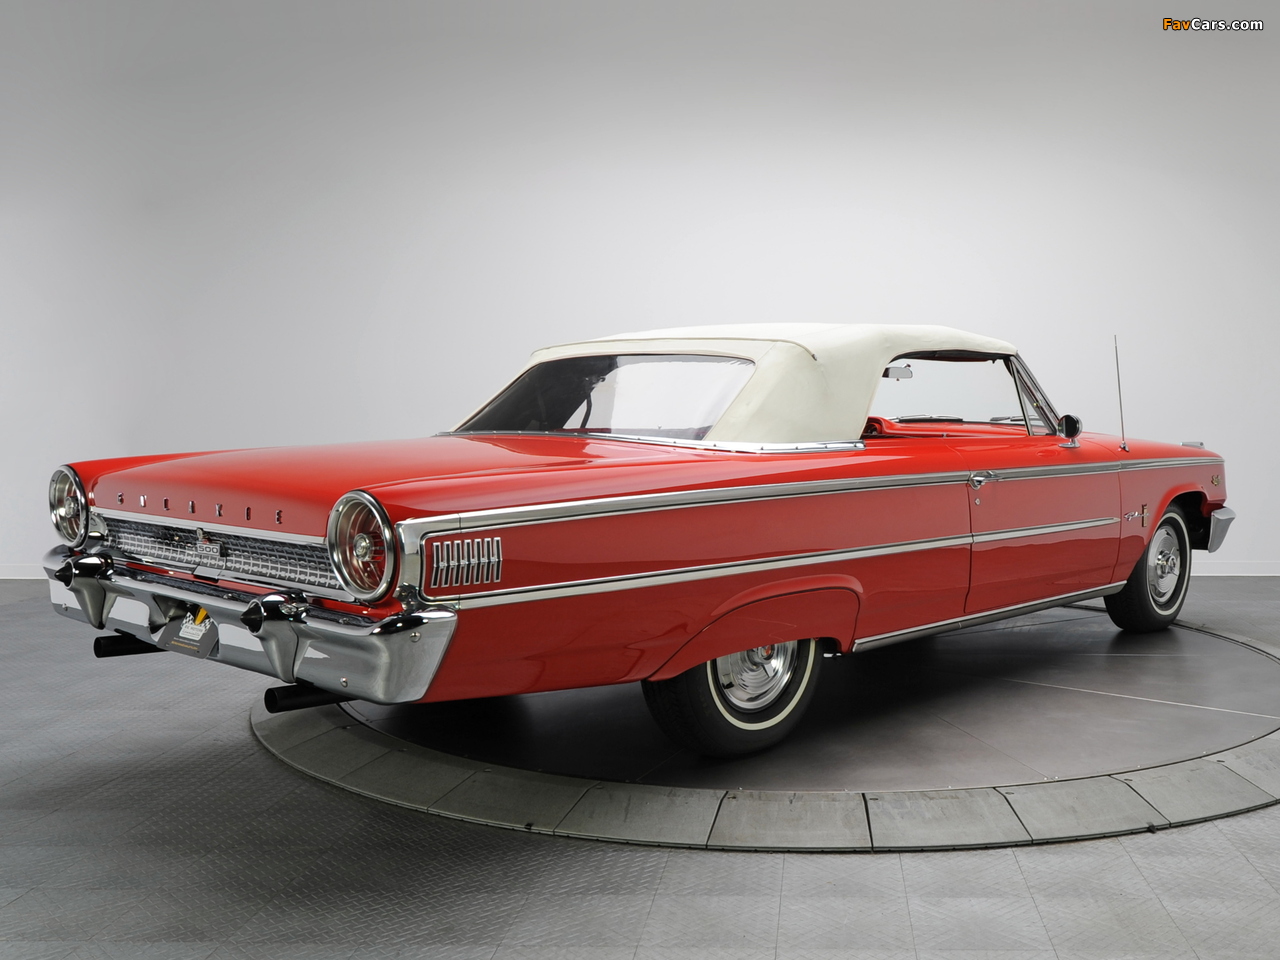 Ford Galaxie 500 Sunliner (65) 1963 pictures (1280 x 960)